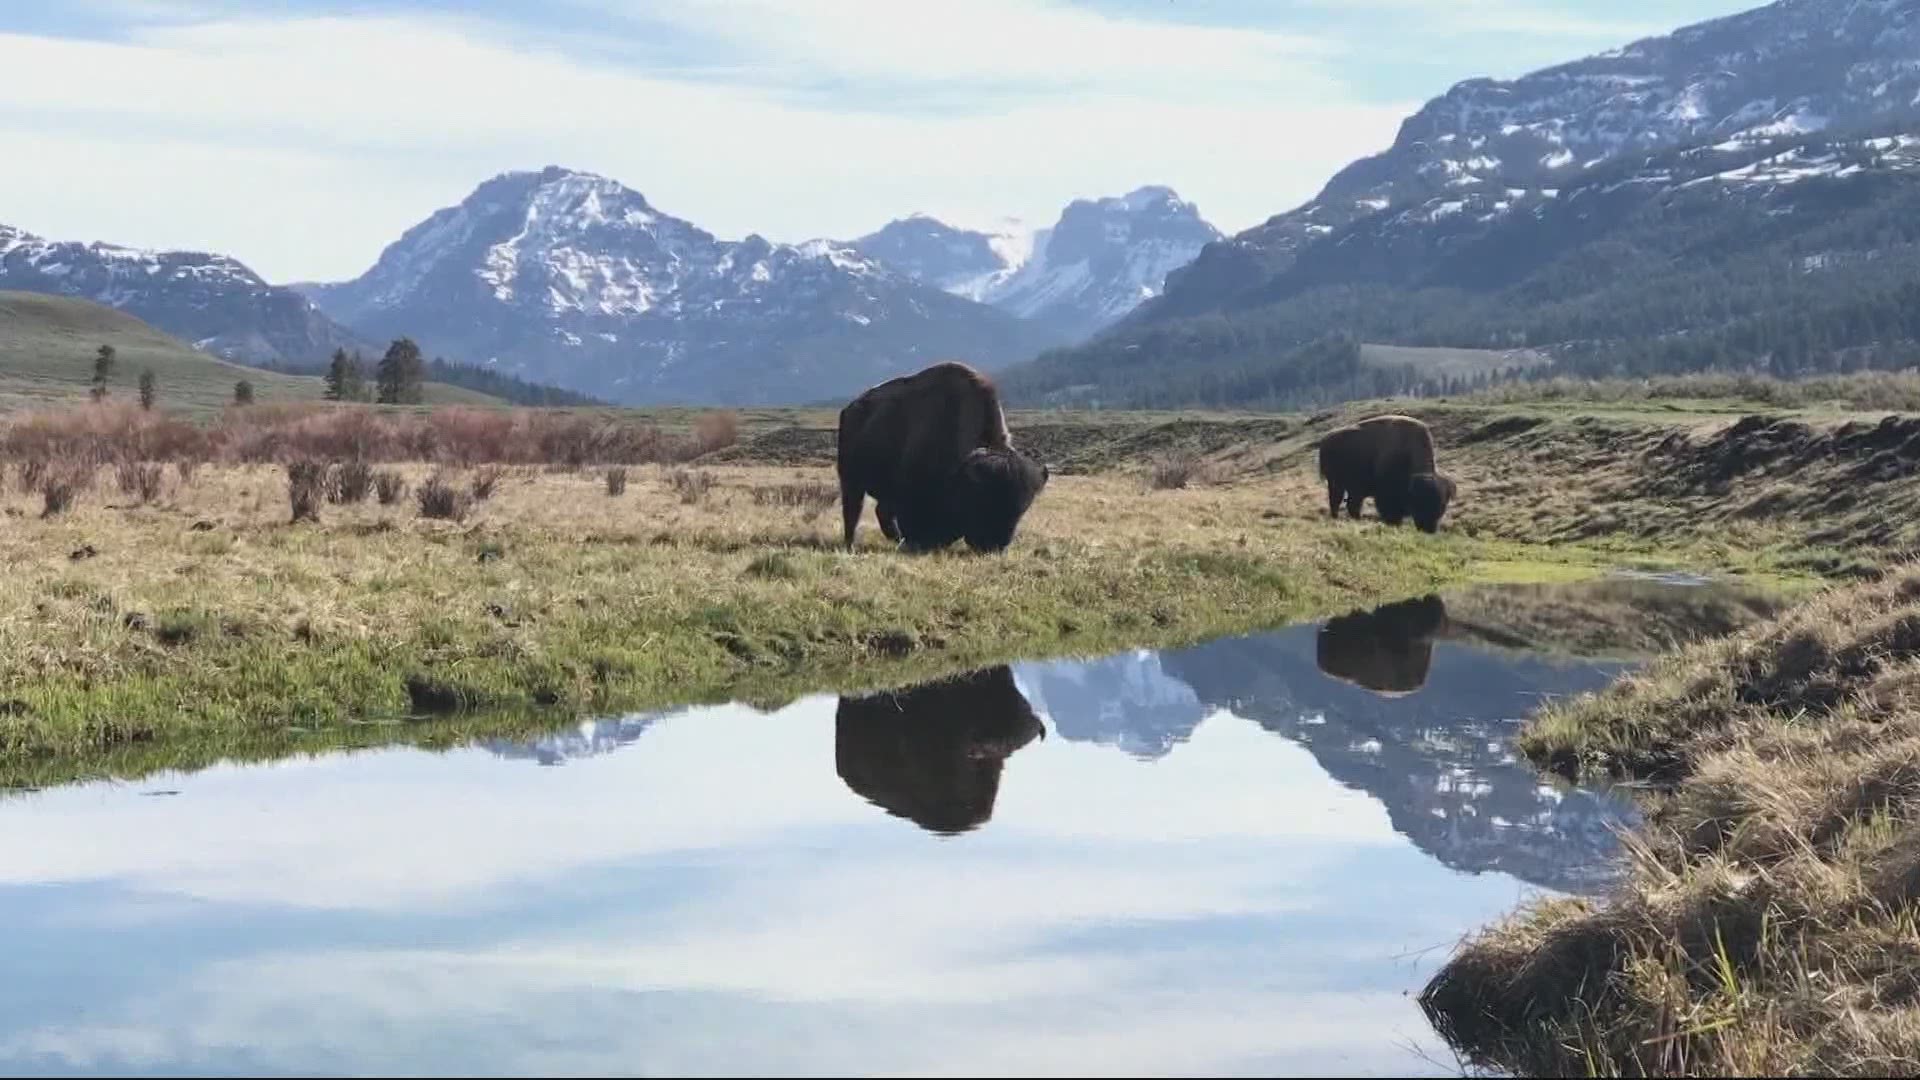 Some of the top travel destinations are places that offer wide open spaces, places like Montana and Yellowstone.